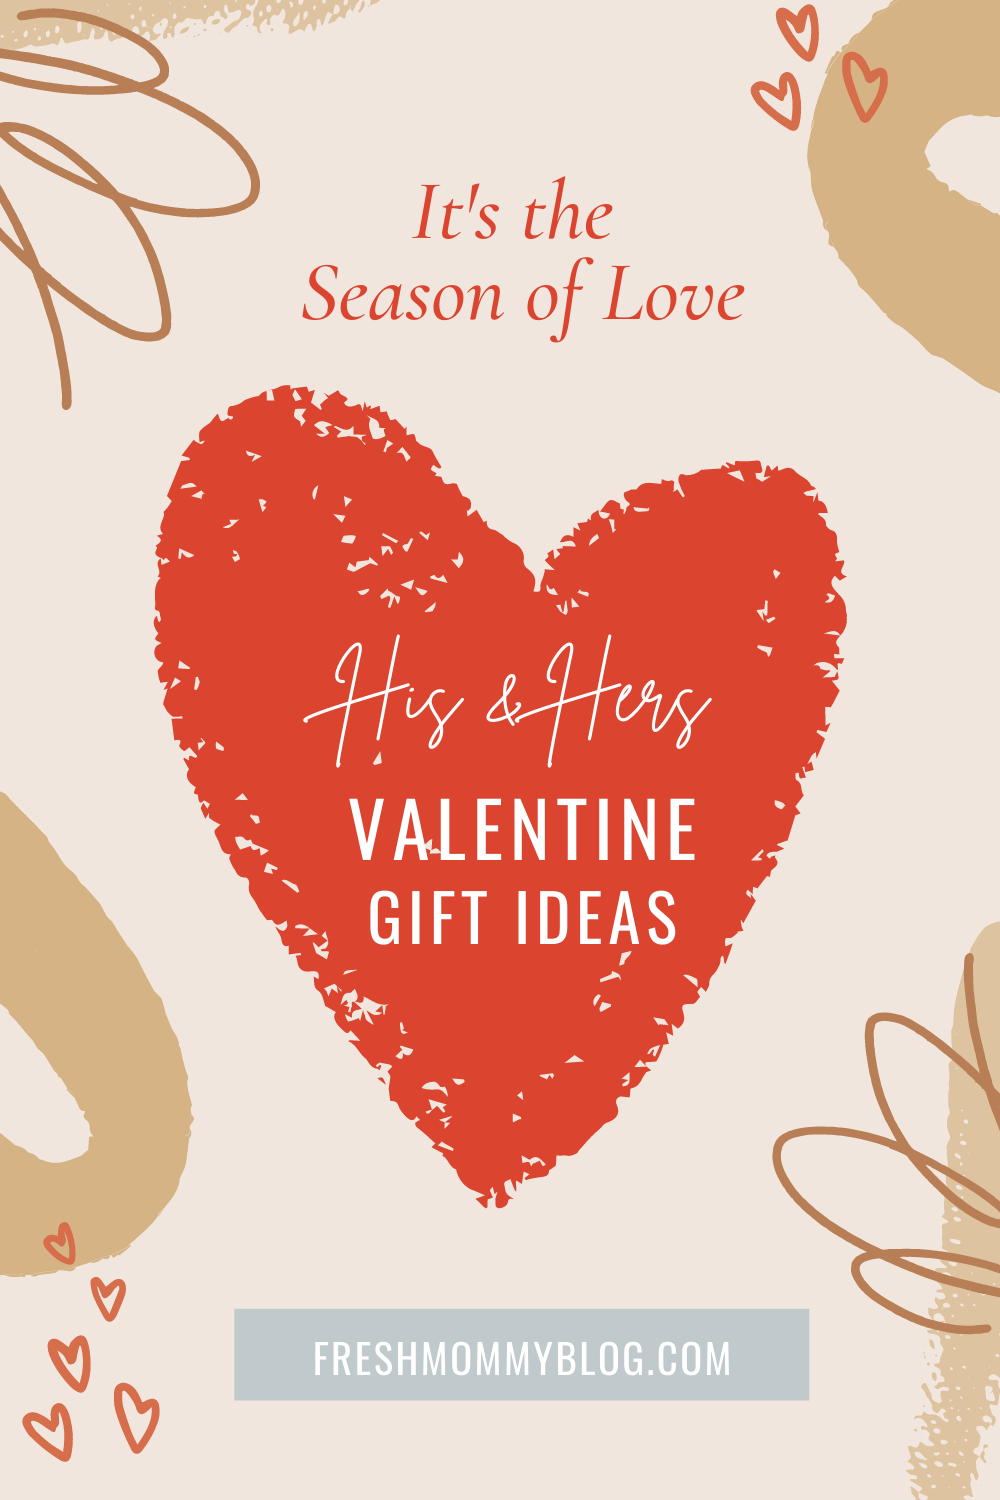 Valentine's Day Gift Guide for him and her by top uS lifestyle blogger, Tabitha blue of Fresh Mommy Blog